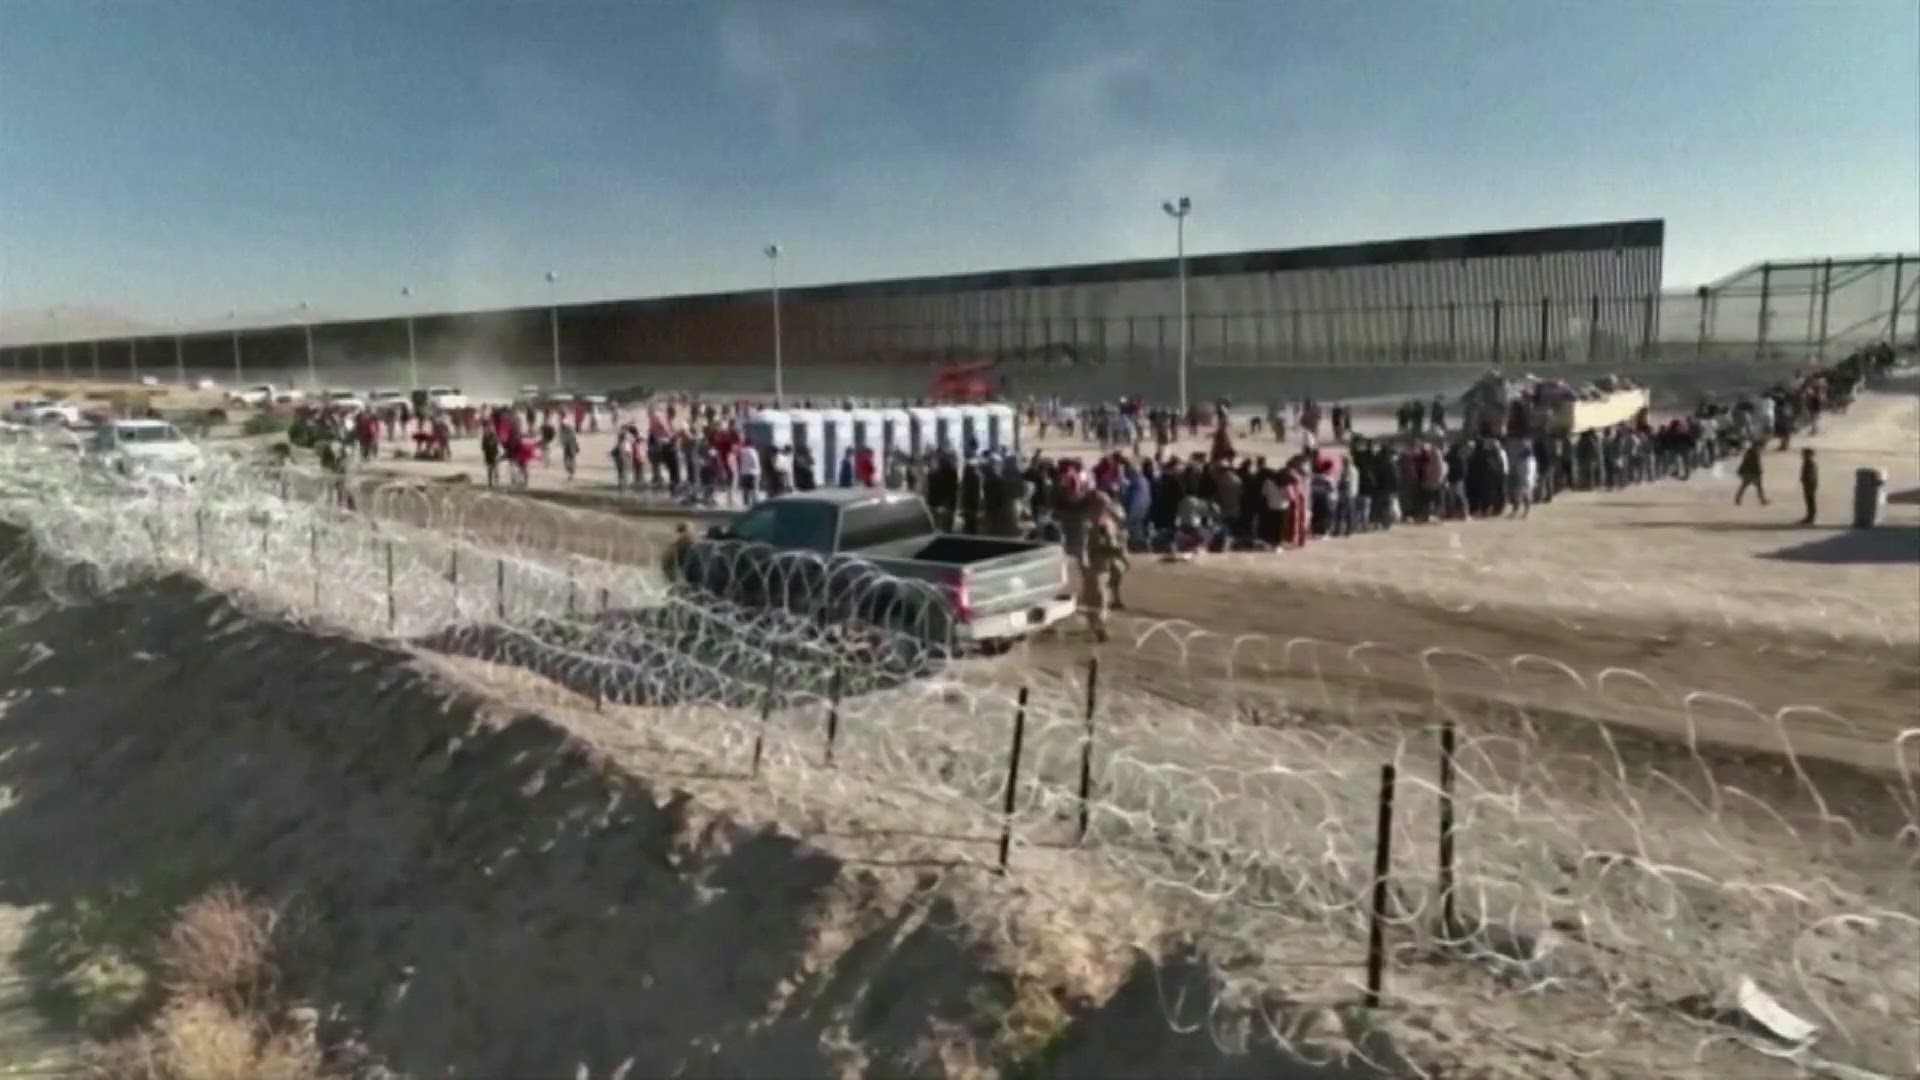 Officials said they have seen a drop in the number of people at the southern border.